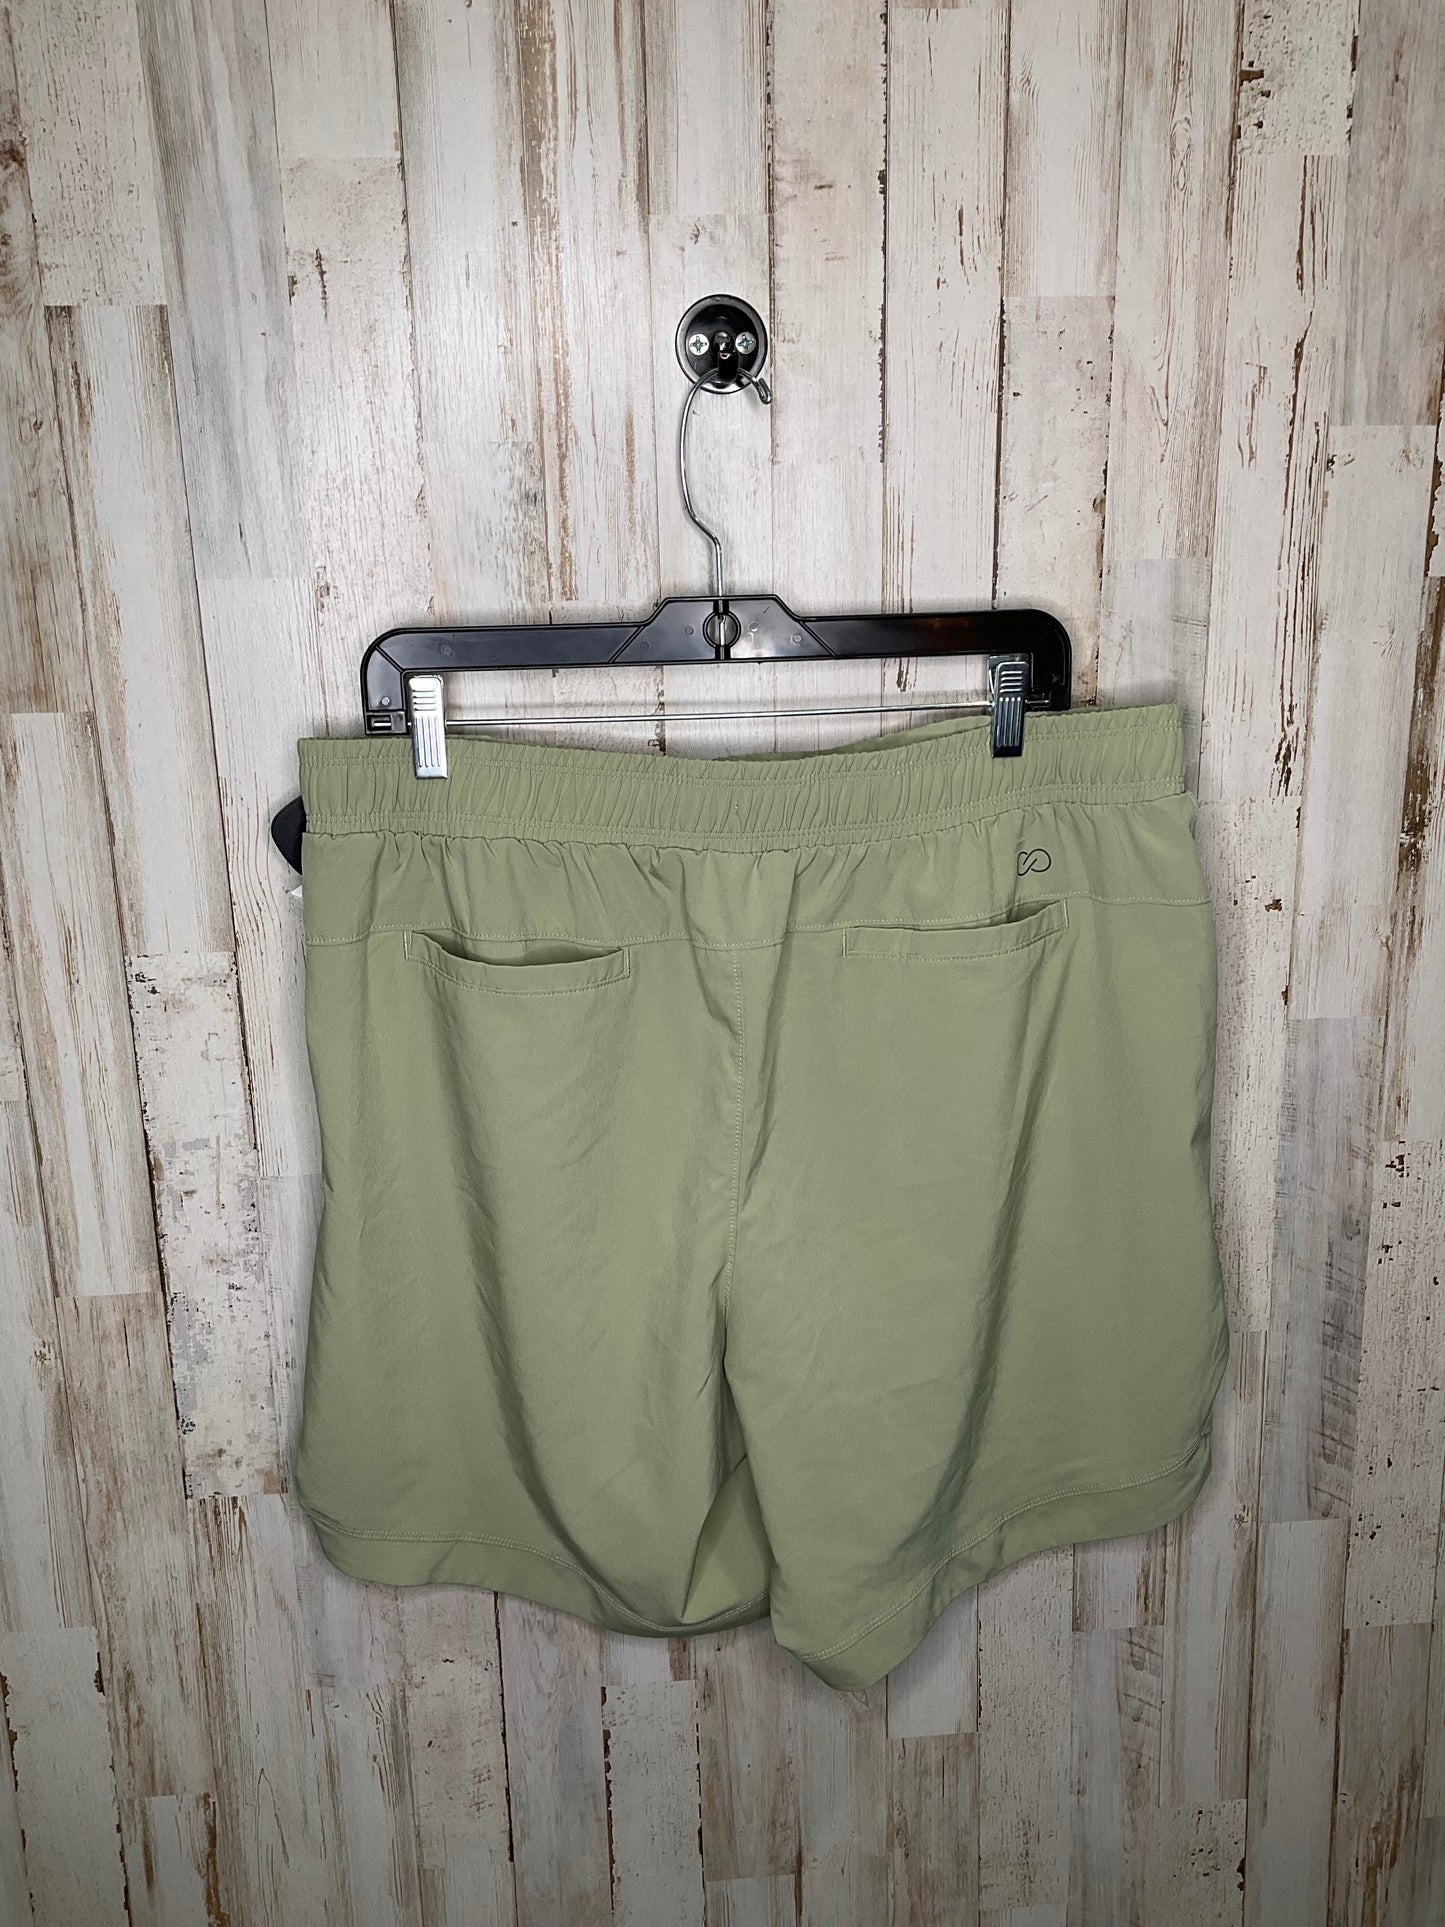 Athletic Shorts By Calia  Size: Xl